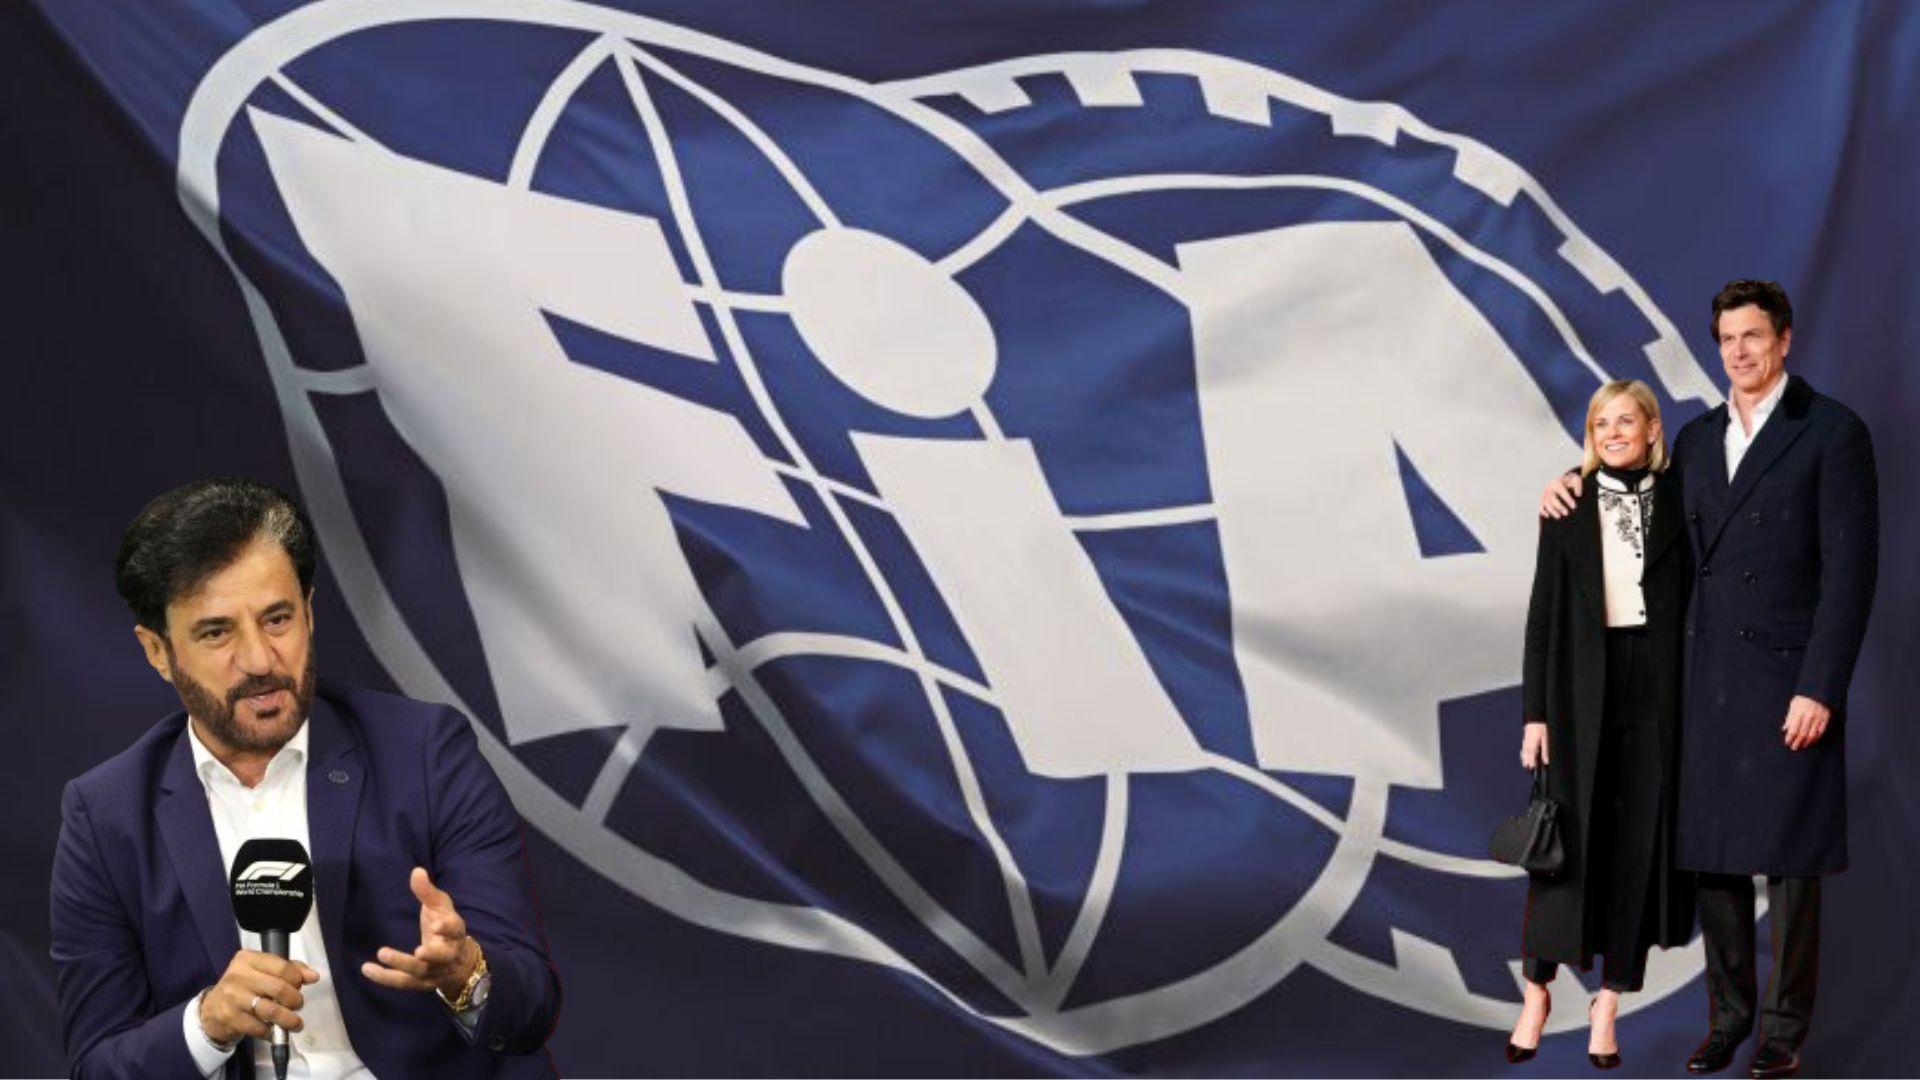 Susie Wolff, Toto Wolff and FIA president Mohammed Ben Sulayem in front of an FIA flag